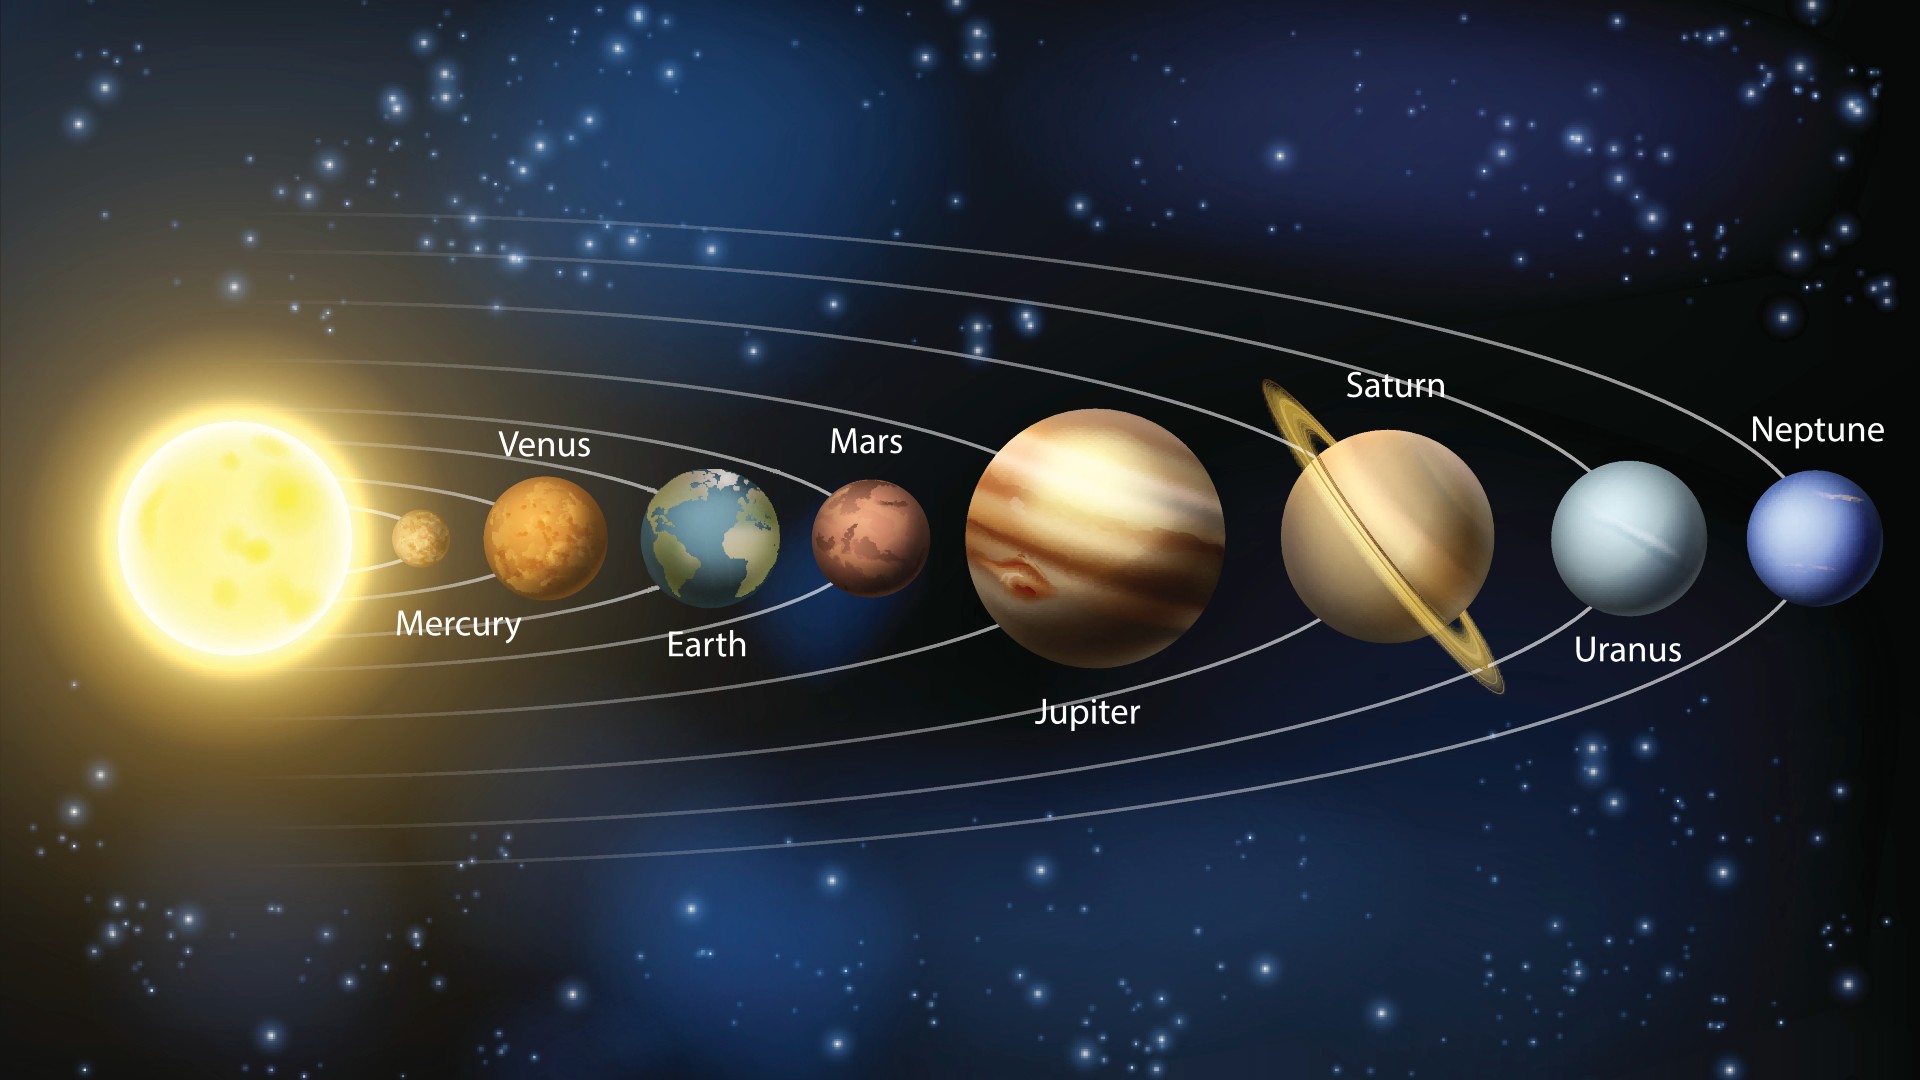 Planetary Diagram With Names Of Planets In Our Solar System.  From Left To Right: Sun (Bright Yellow), Mercury (Smallest, Brown), Venus (Slightly Larger, Reddish-Brown), Earth (Slightly Larger, Blue And Green), Mars (Slightly Smaller, Red), Jupiter (Largest ), Brown And Beige), Saturn (Slightly Smaller, Beige With A Yellow Ring Around It), Uranus (Smaller, But Larger Than Earth Grey), And Neptune (Slightly Smaller, Blue).  There Are Also White Rings To Represent Each Planet'S Orbit.